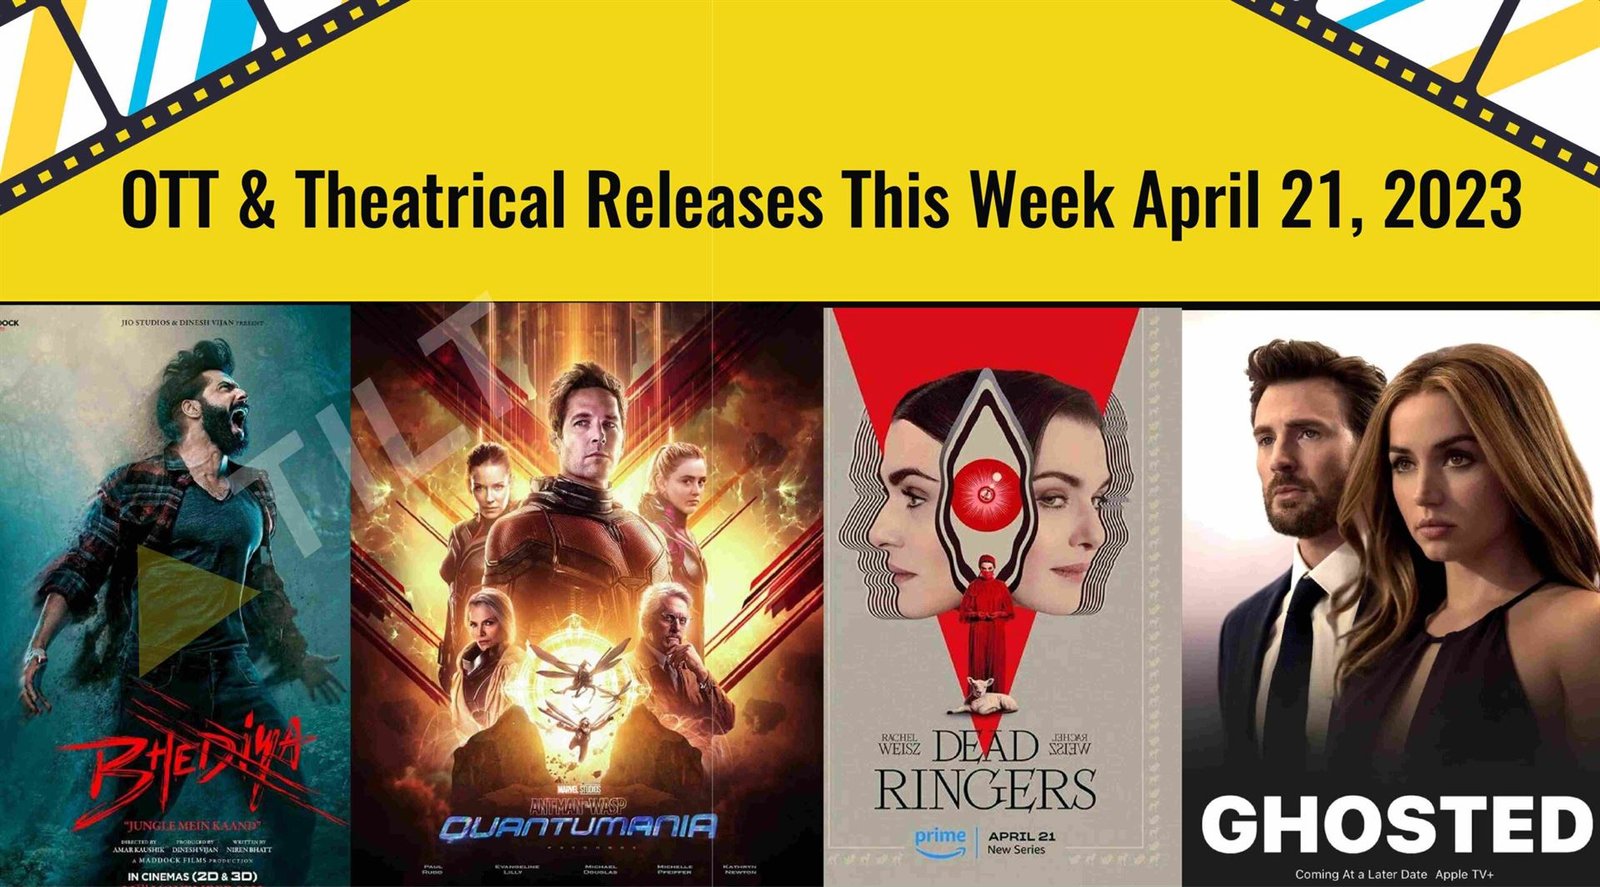 OTT & Theatrical Releases This Week April 21, 2023 - Triangle Tilt